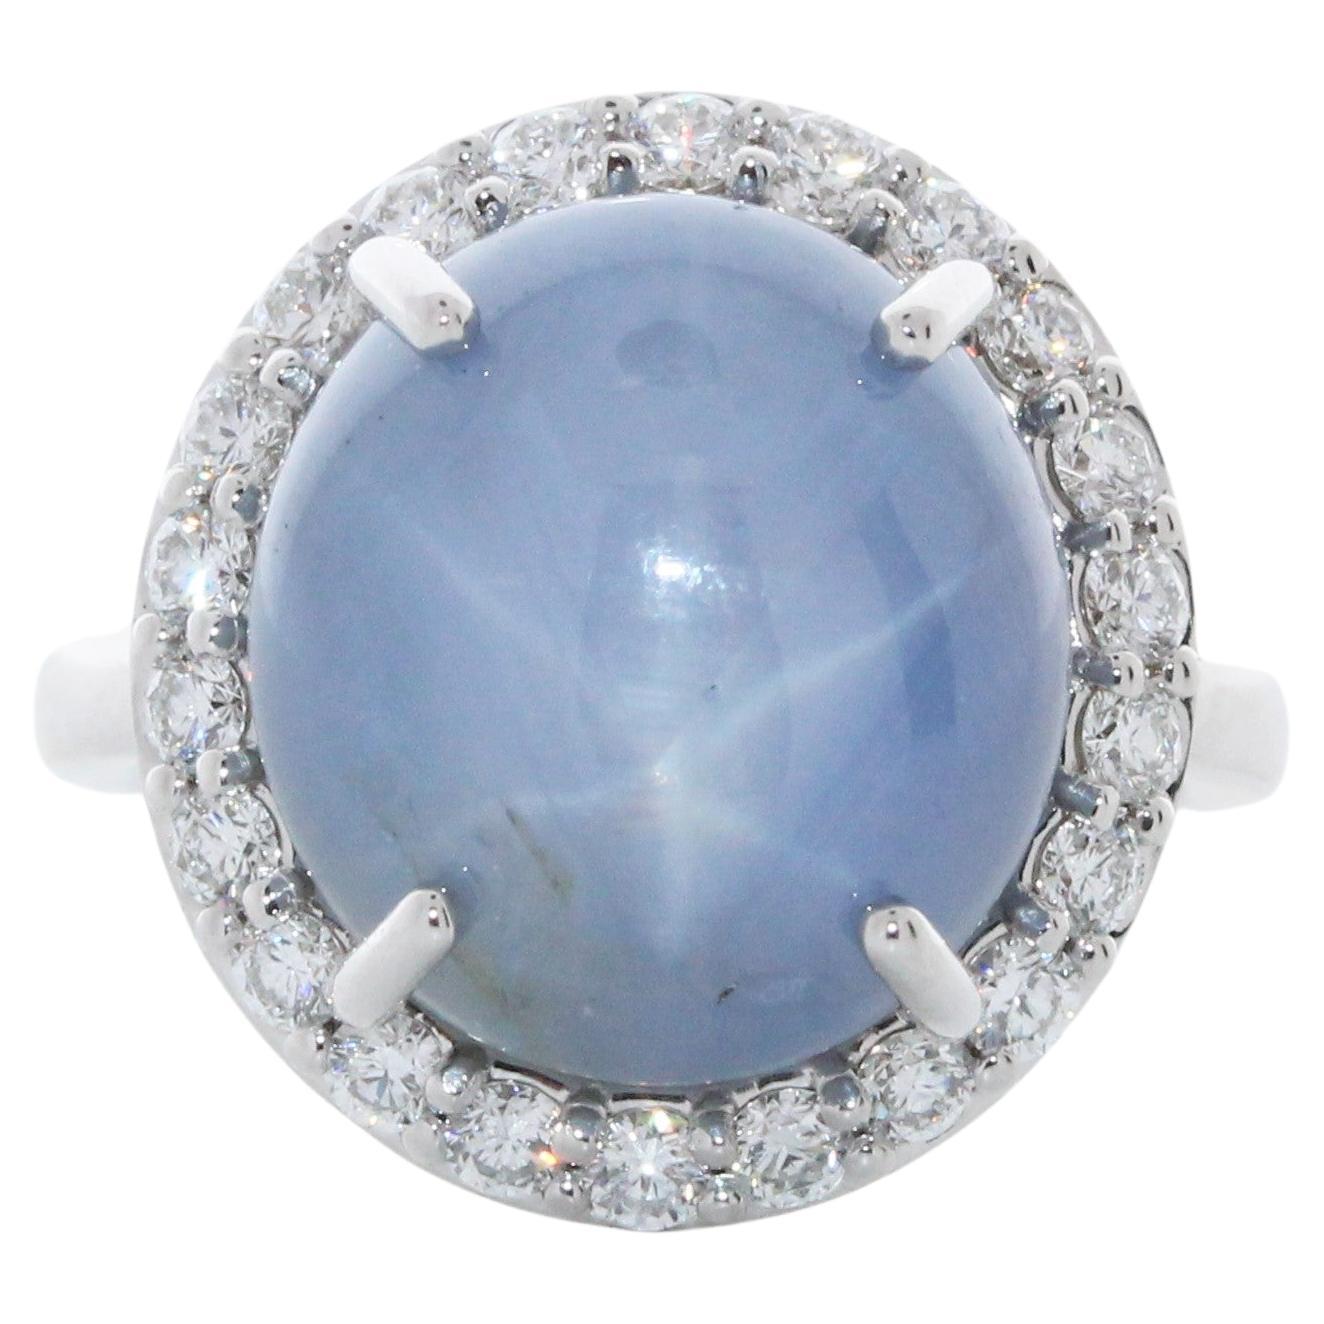 18.21 Ct Weight Cabochon Star Sapphire & Round Diamond Fashion Ring In 18K WG